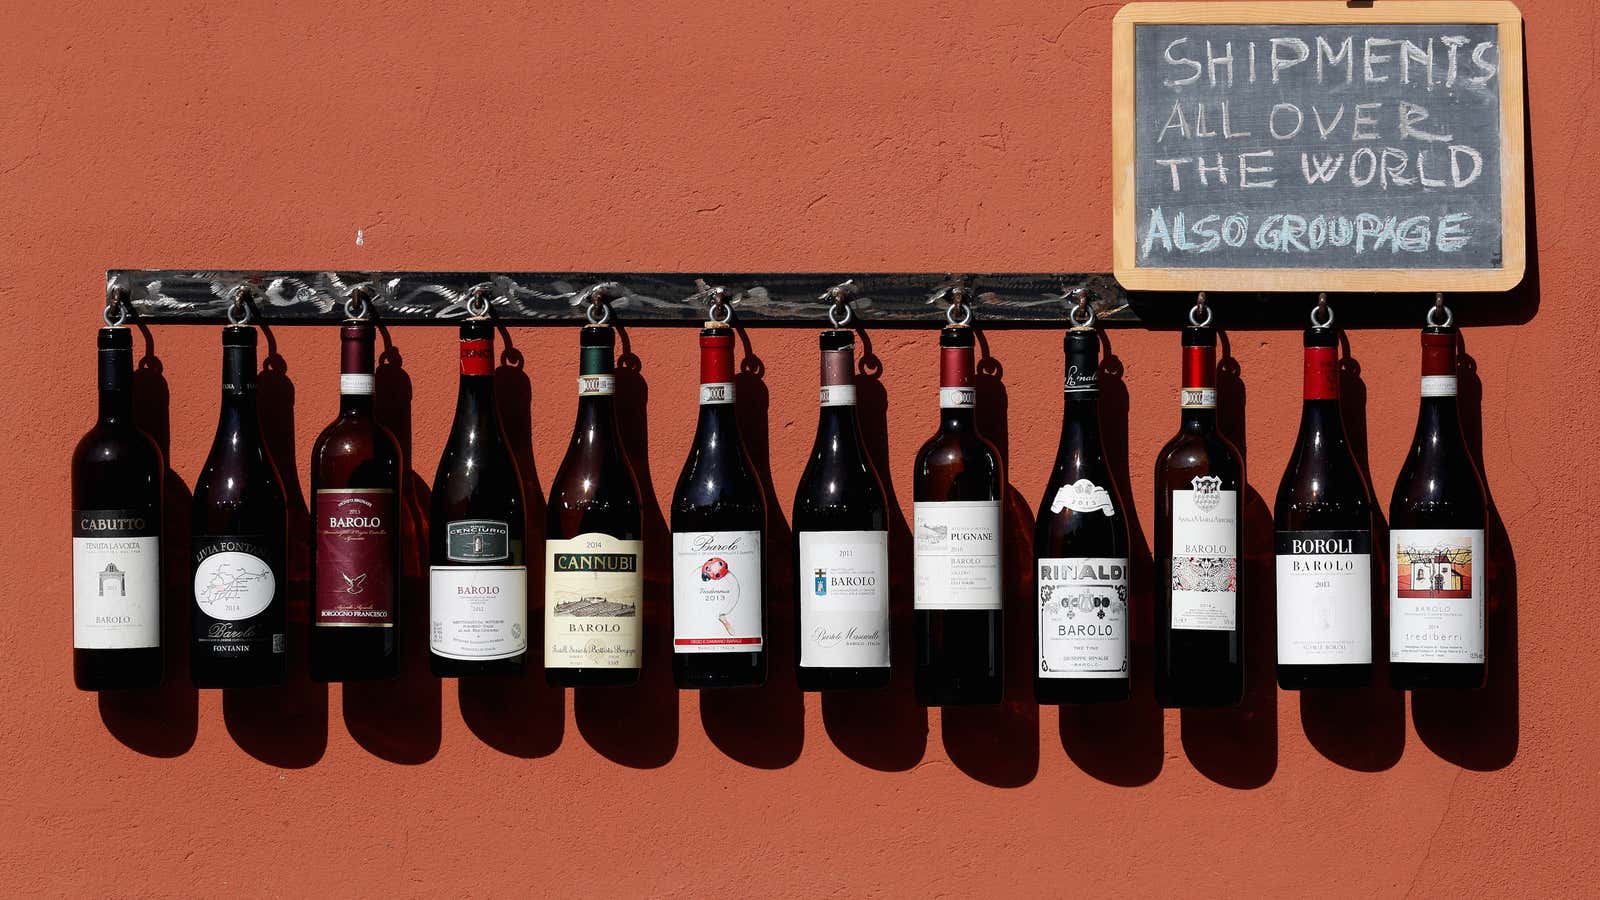 Wine bottles are displayed outside a wine shop in Barolo, Italy, October 19, 2018.